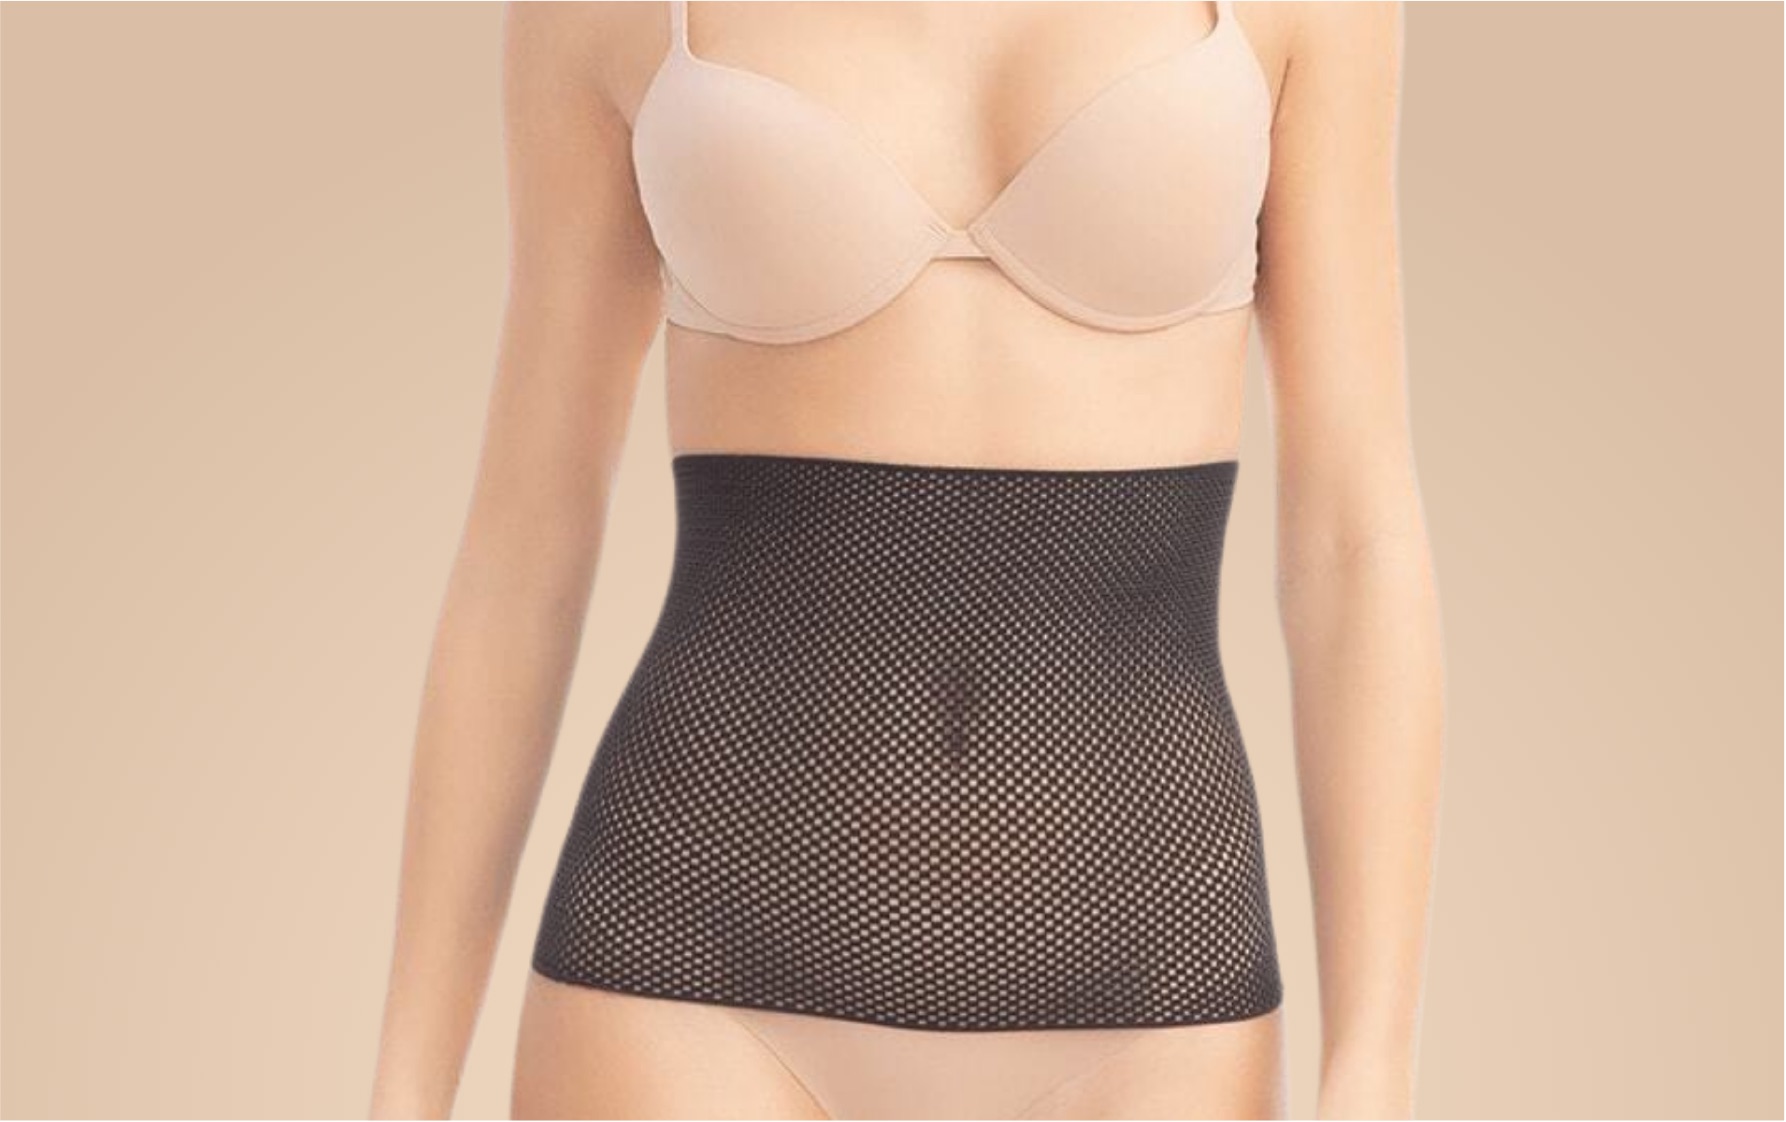 Firm control body shaping panty girdle with light and refreshing nilit  breeze fabric Farmacell